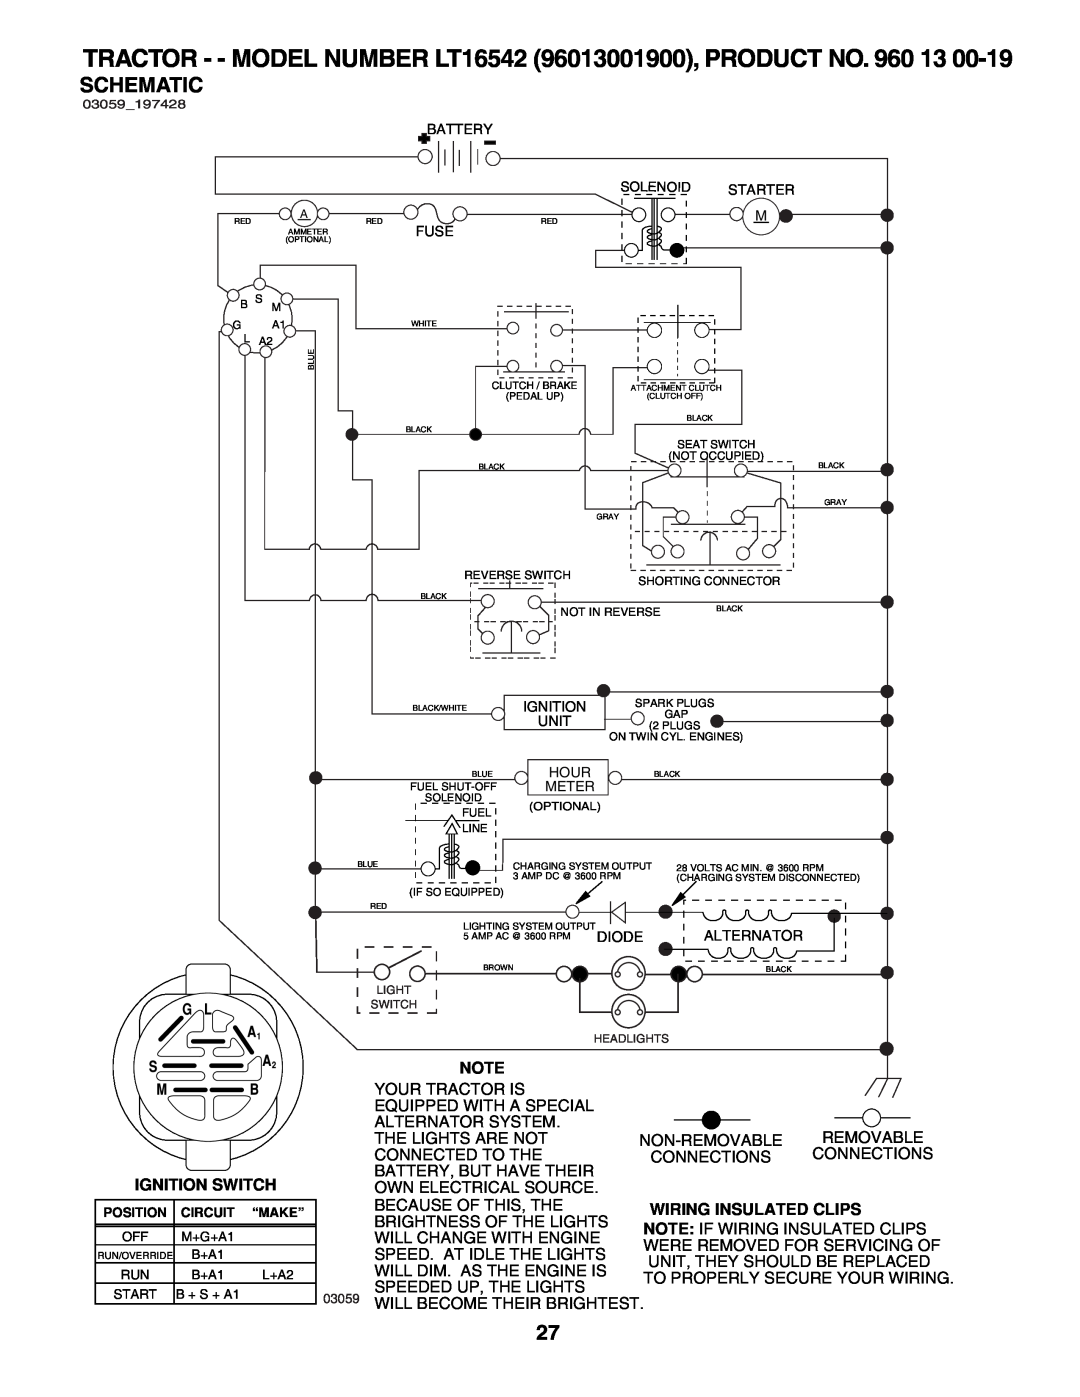 Husqvarna owner manual TRACTOR - - MODEL NUMBER LT16542 96013001900, PRODUCT NO. 960 13, Schematic 